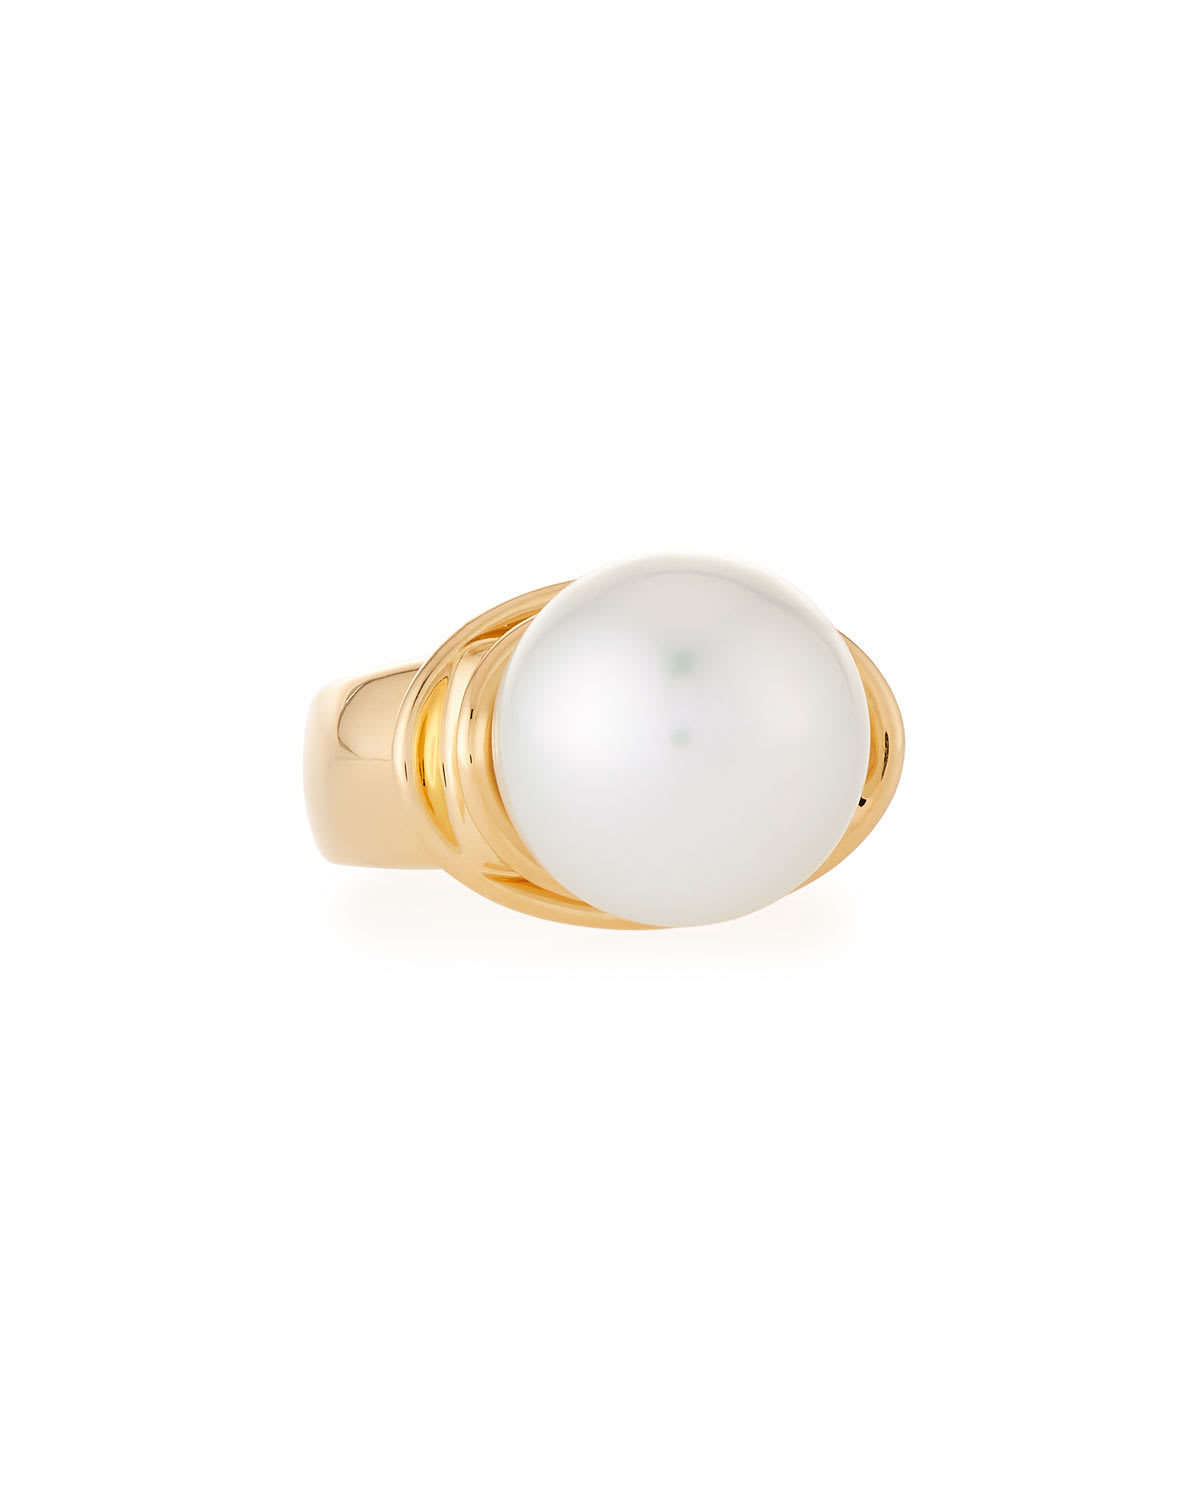 Assael 14mm Pearl Solitaire Ring in 18K Gold